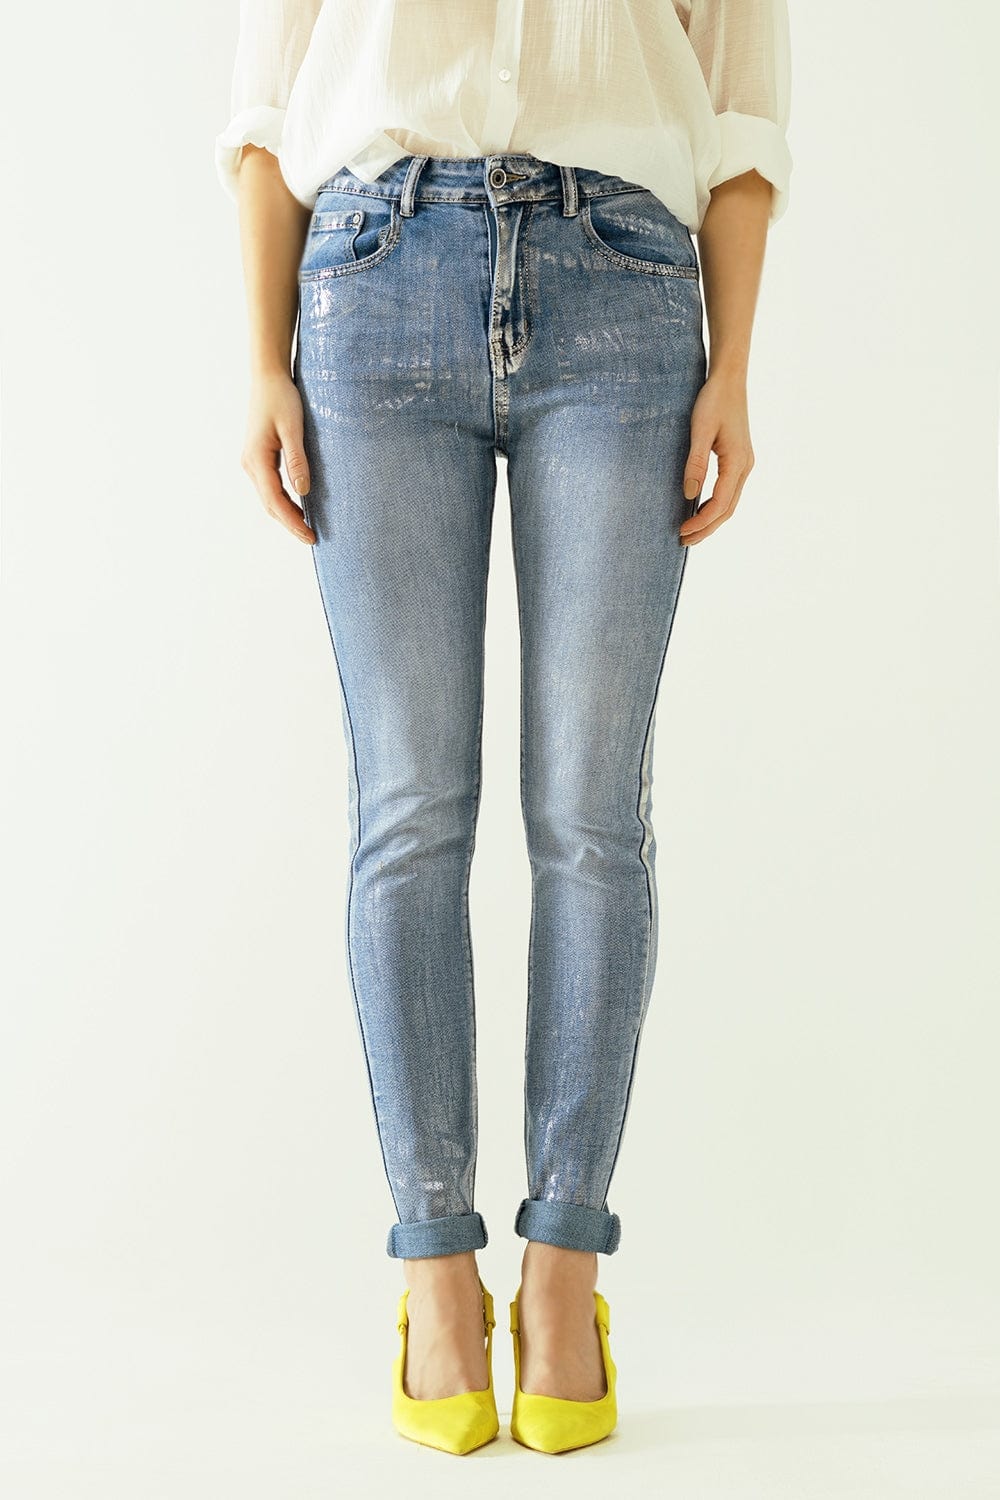 Q2 Women's Jean High-Waisted Jeans With Five Pockets With Silver Powder-Coated Effect